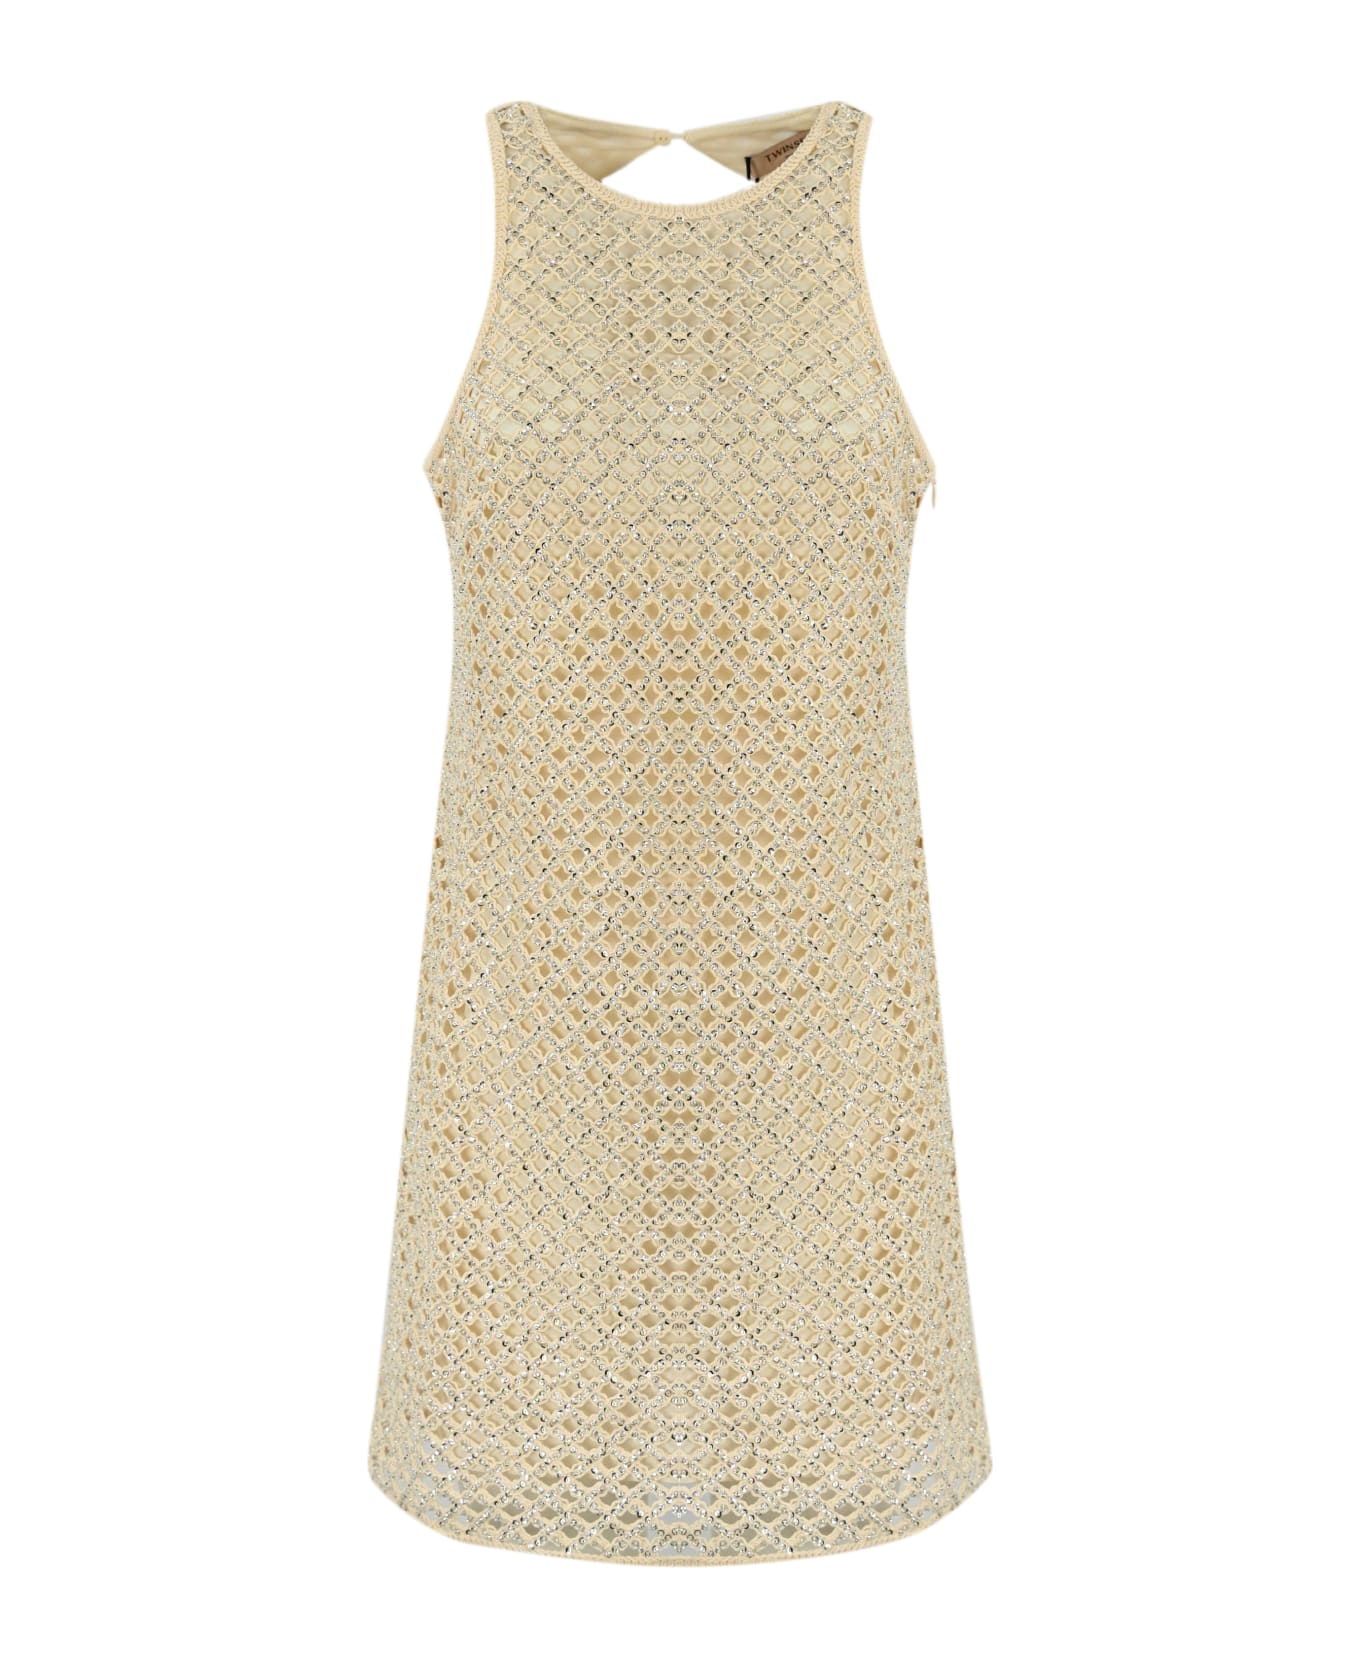 TwinSet Net Dress With Beads And Rhinestones - Beige